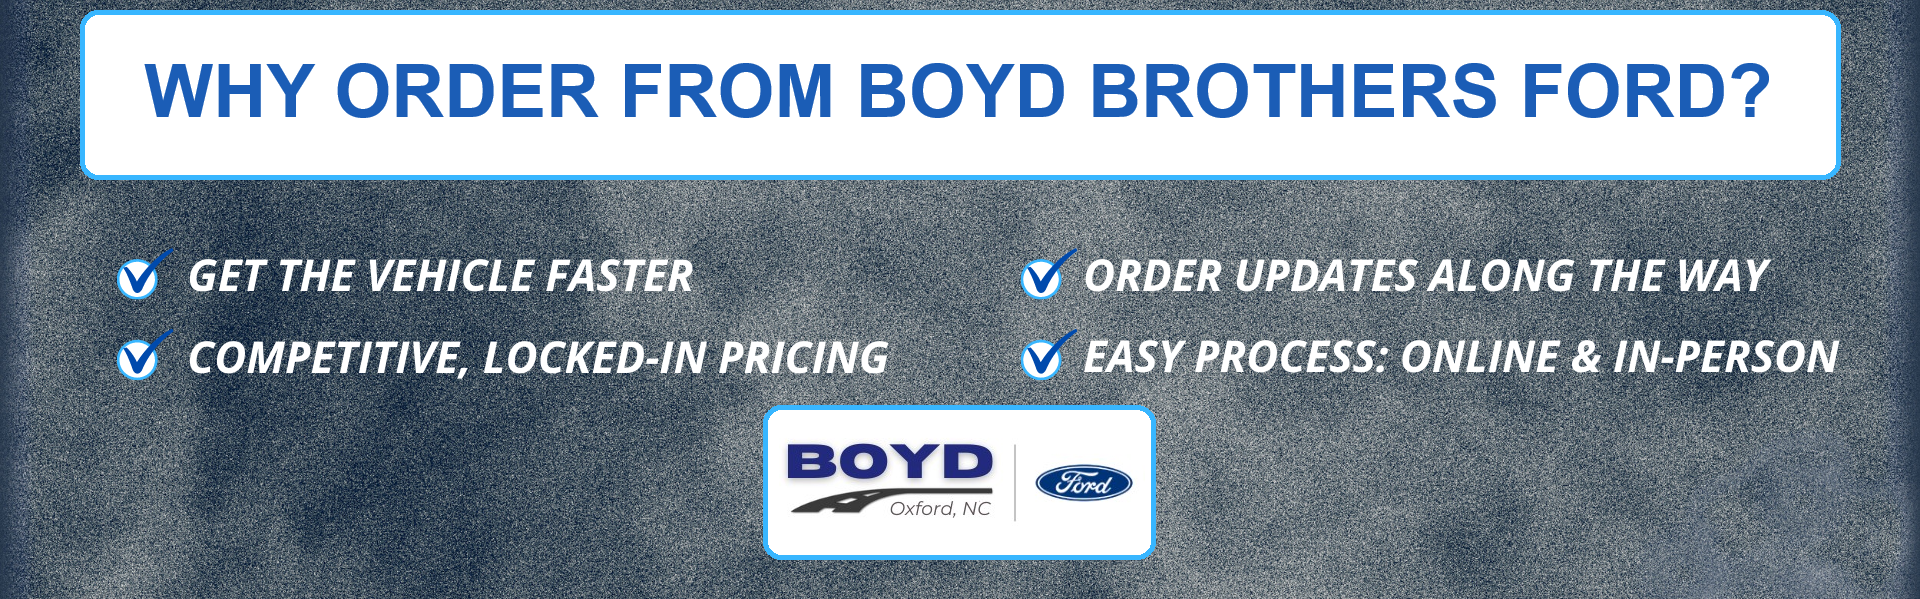 Why Order from Boyd gray background